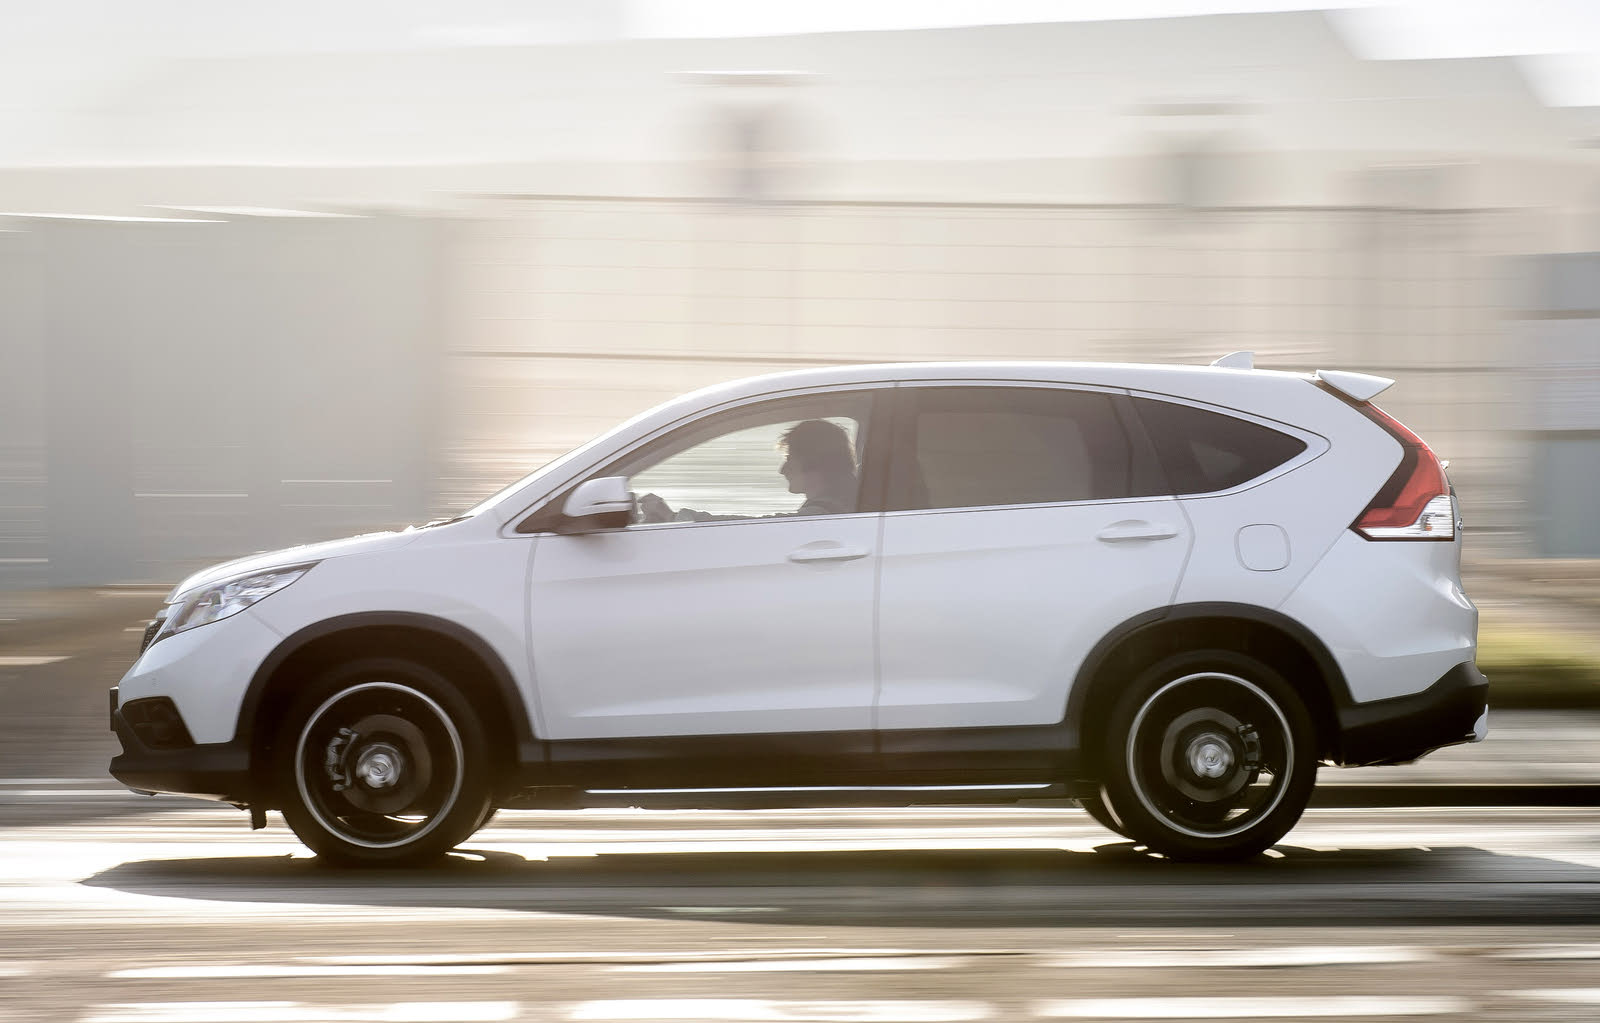 What's The Difference Between An SUV And A Crossover?